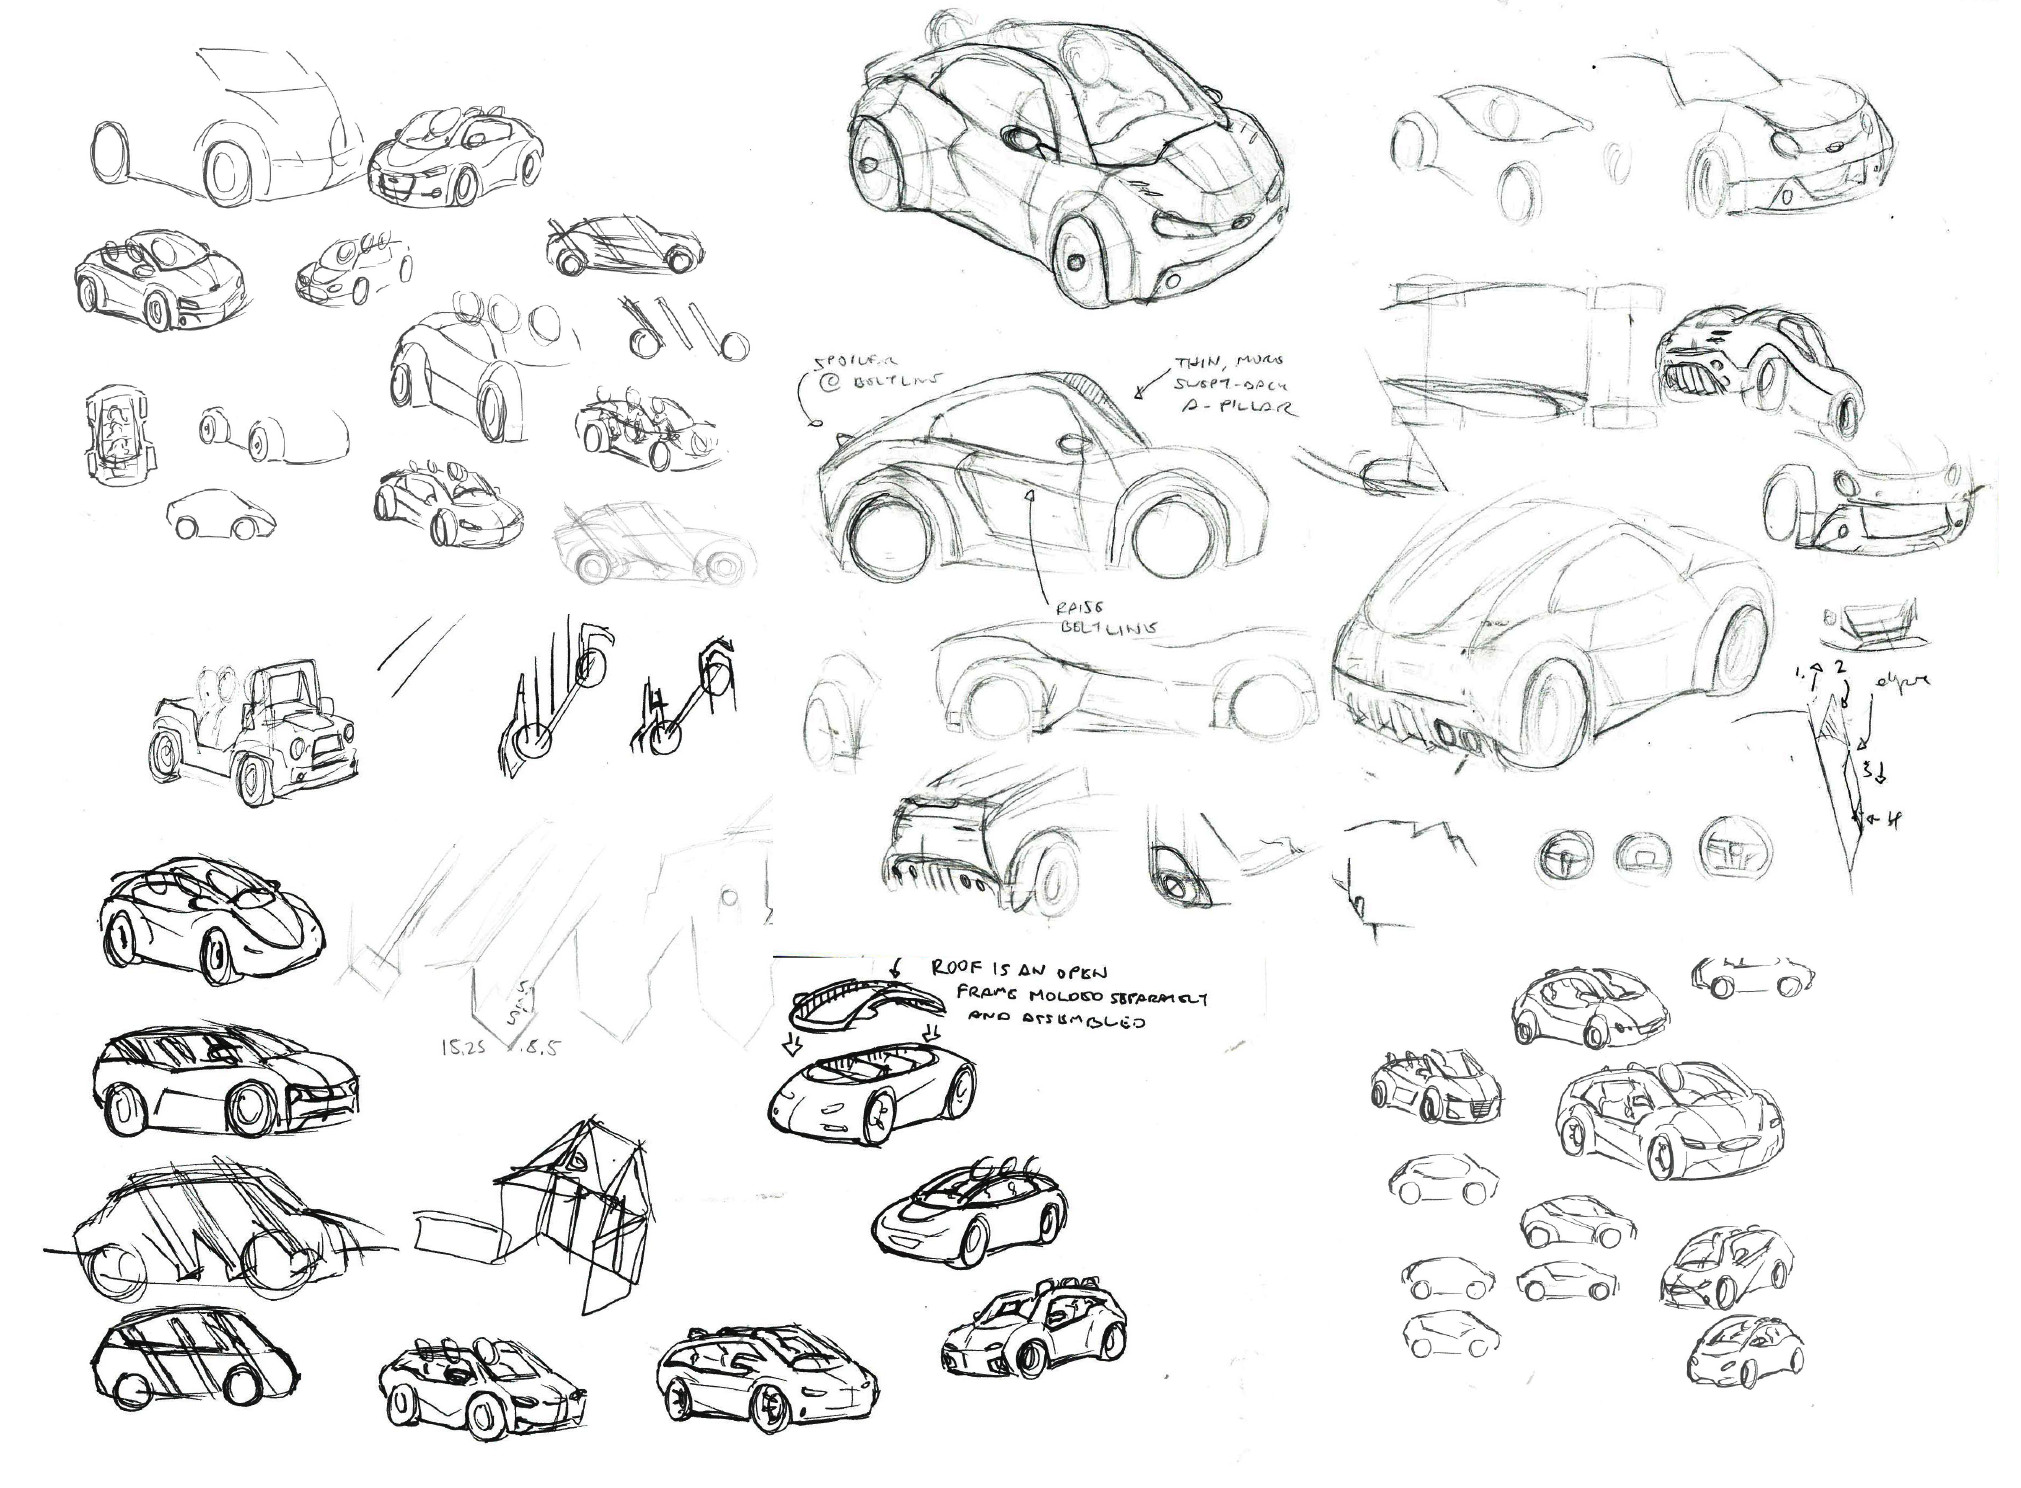 Thumbnail sketch exploration for the sports car included with the "Our House" set. The vehicle had to fit three figures, and accomplishing that while maintaining a sporty "roofline" was another fun challenge.